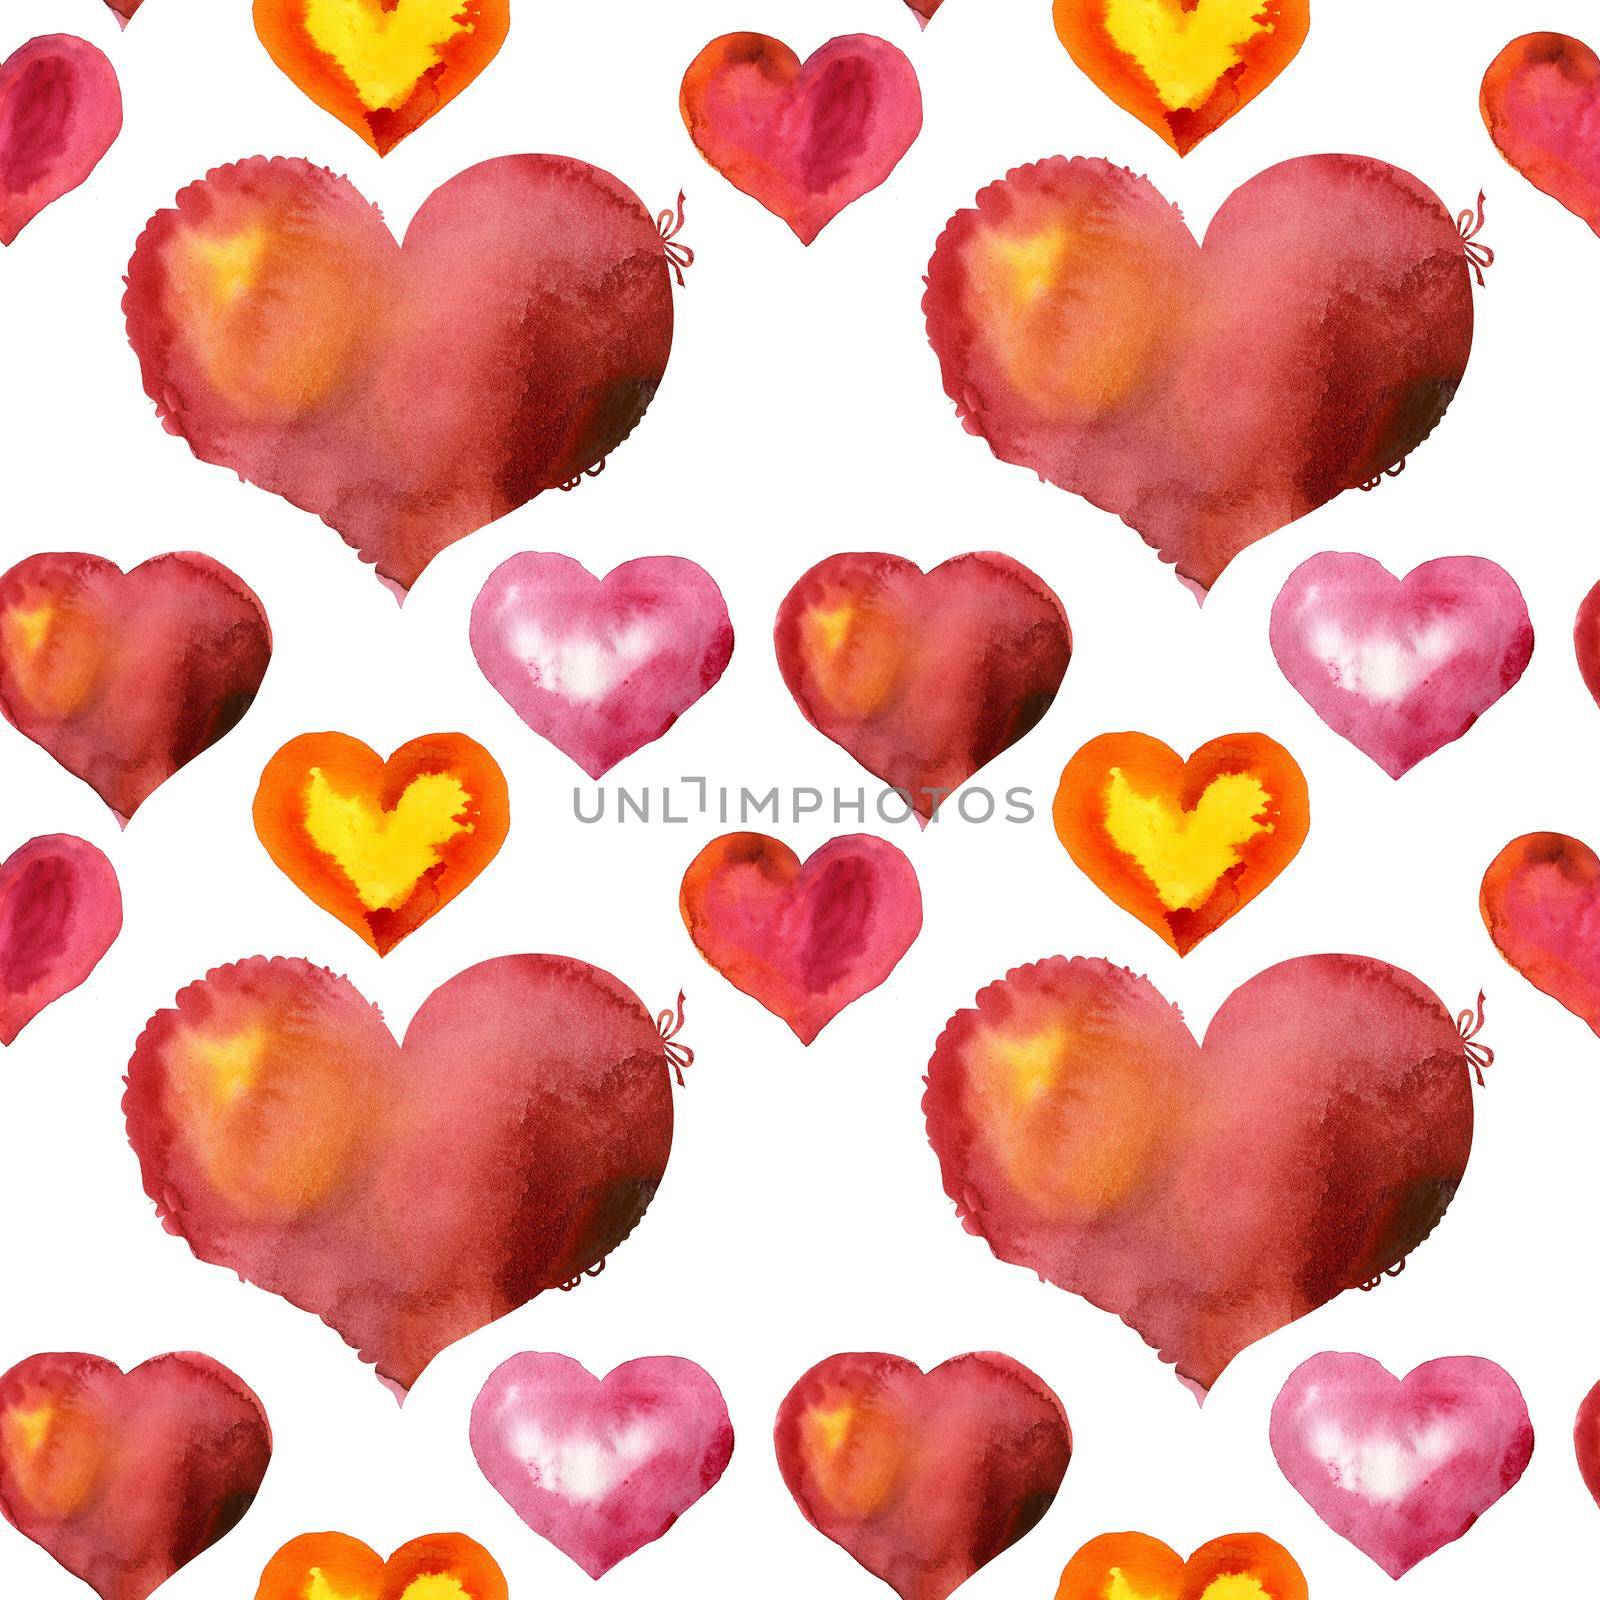 Seamless pattern of watercolor red hearts with light and shade, painted by hand